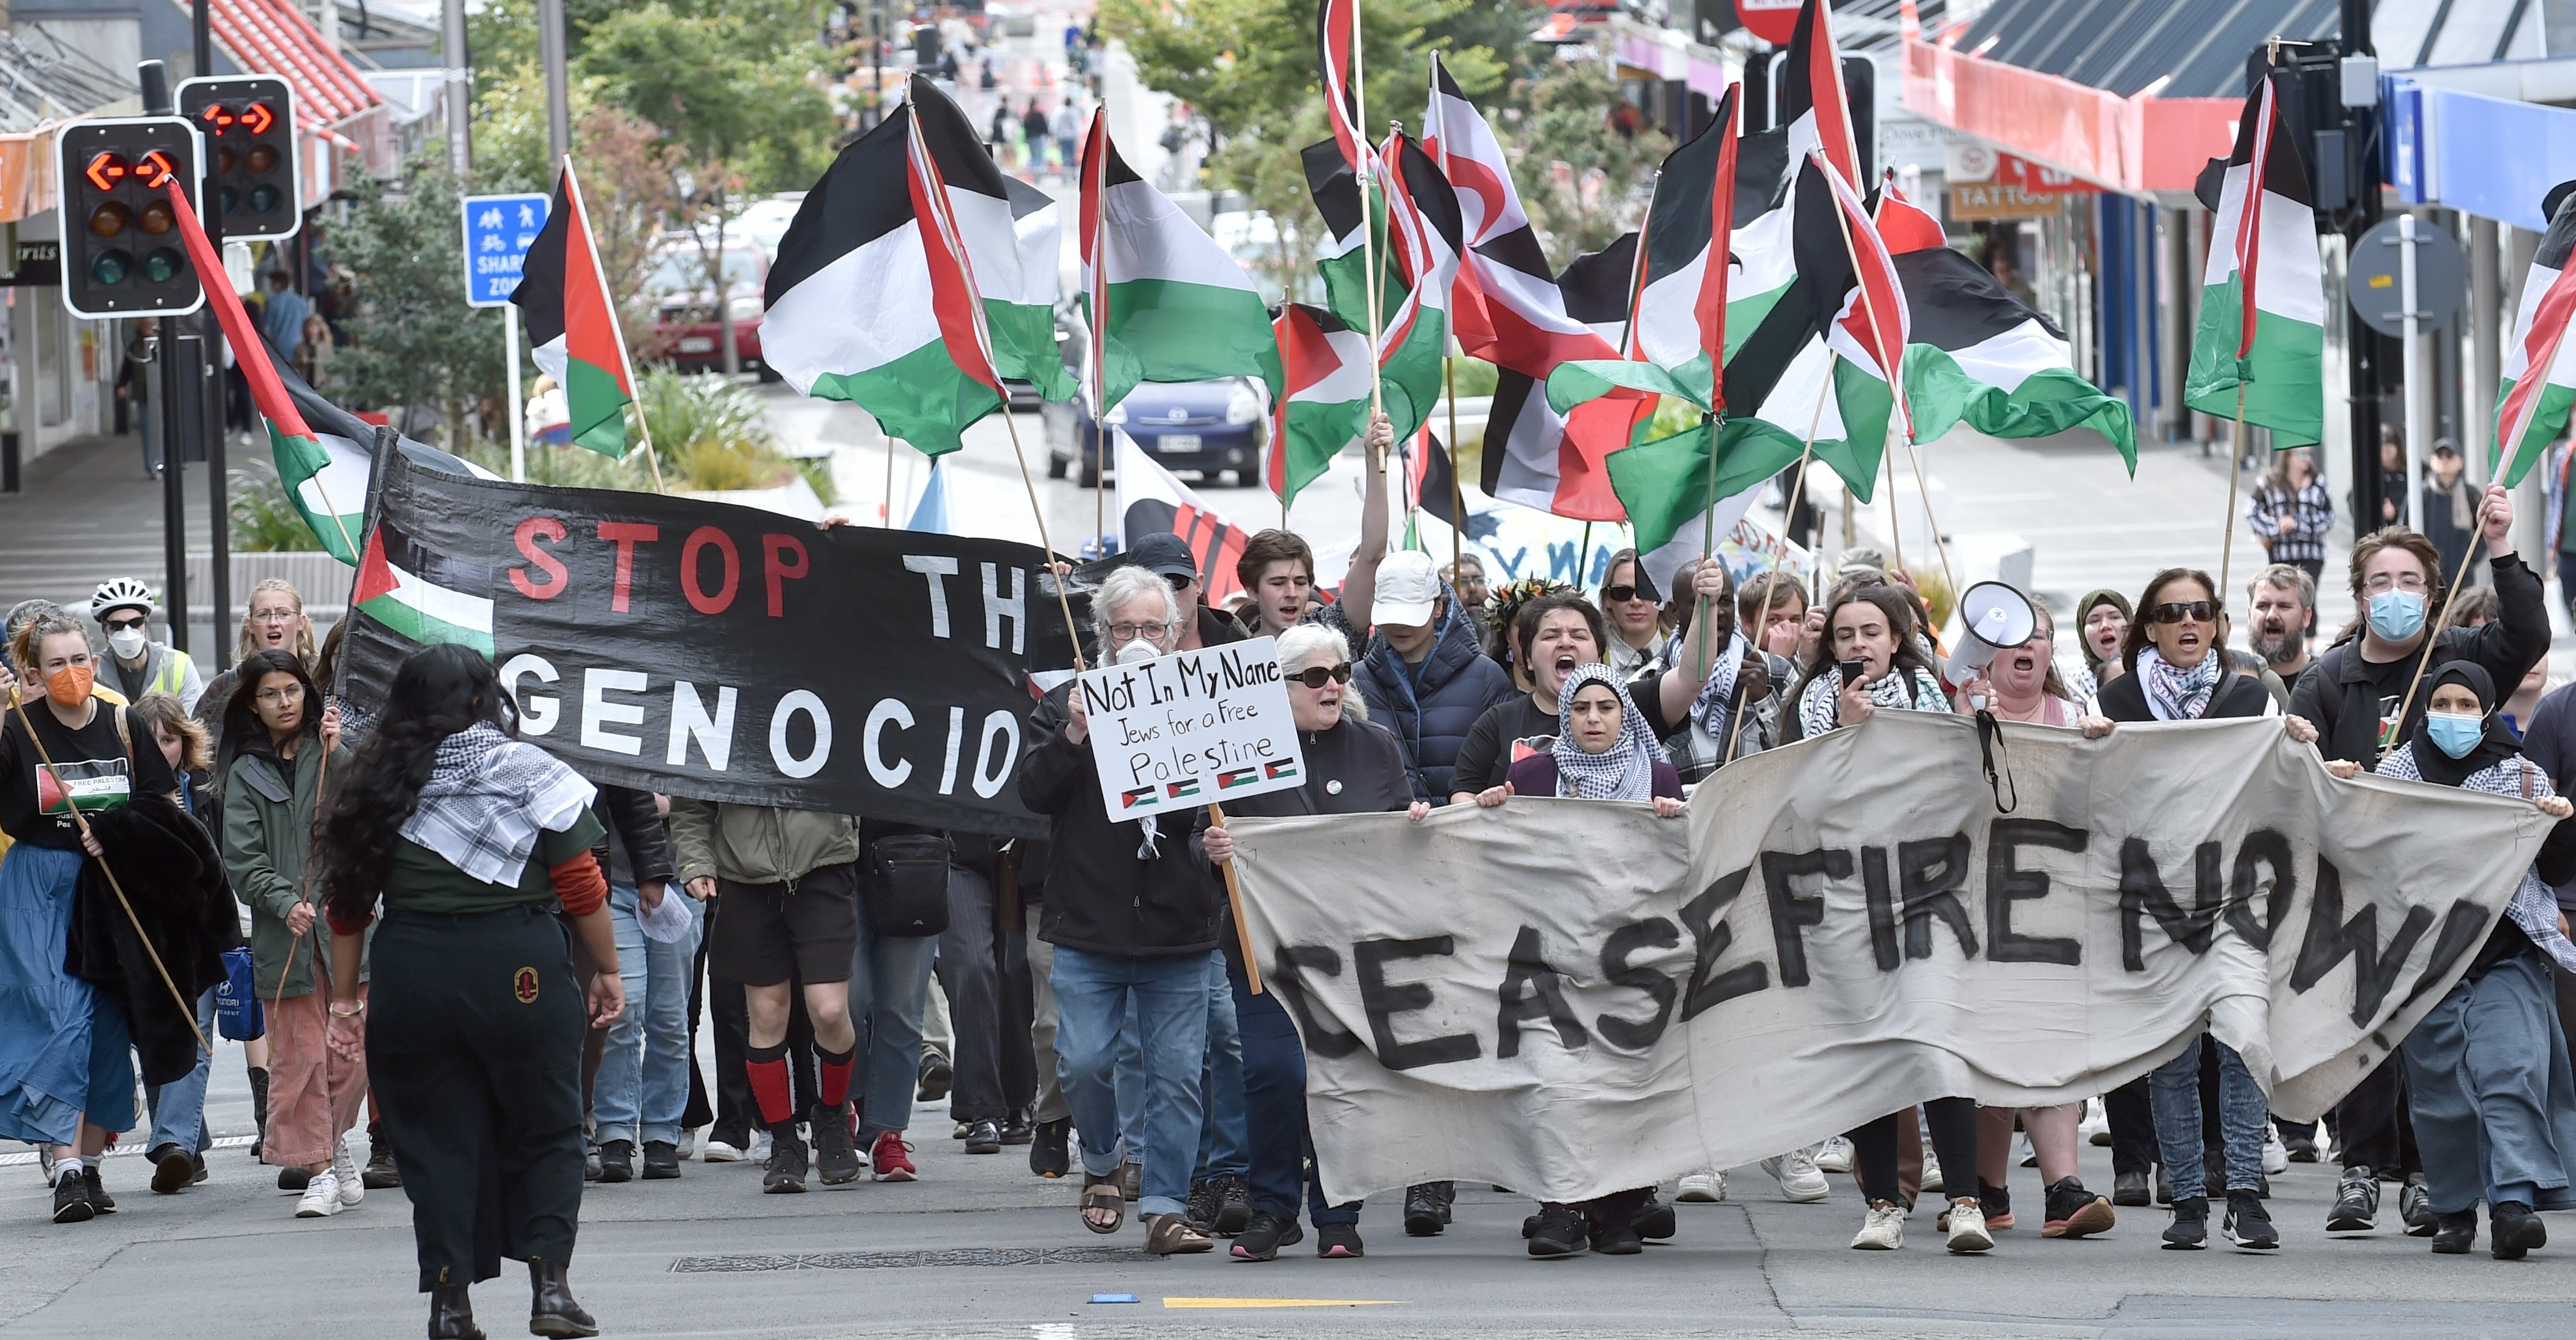 A large group of people took to the streets of Dunedin again, calling for a ceasefire in the...